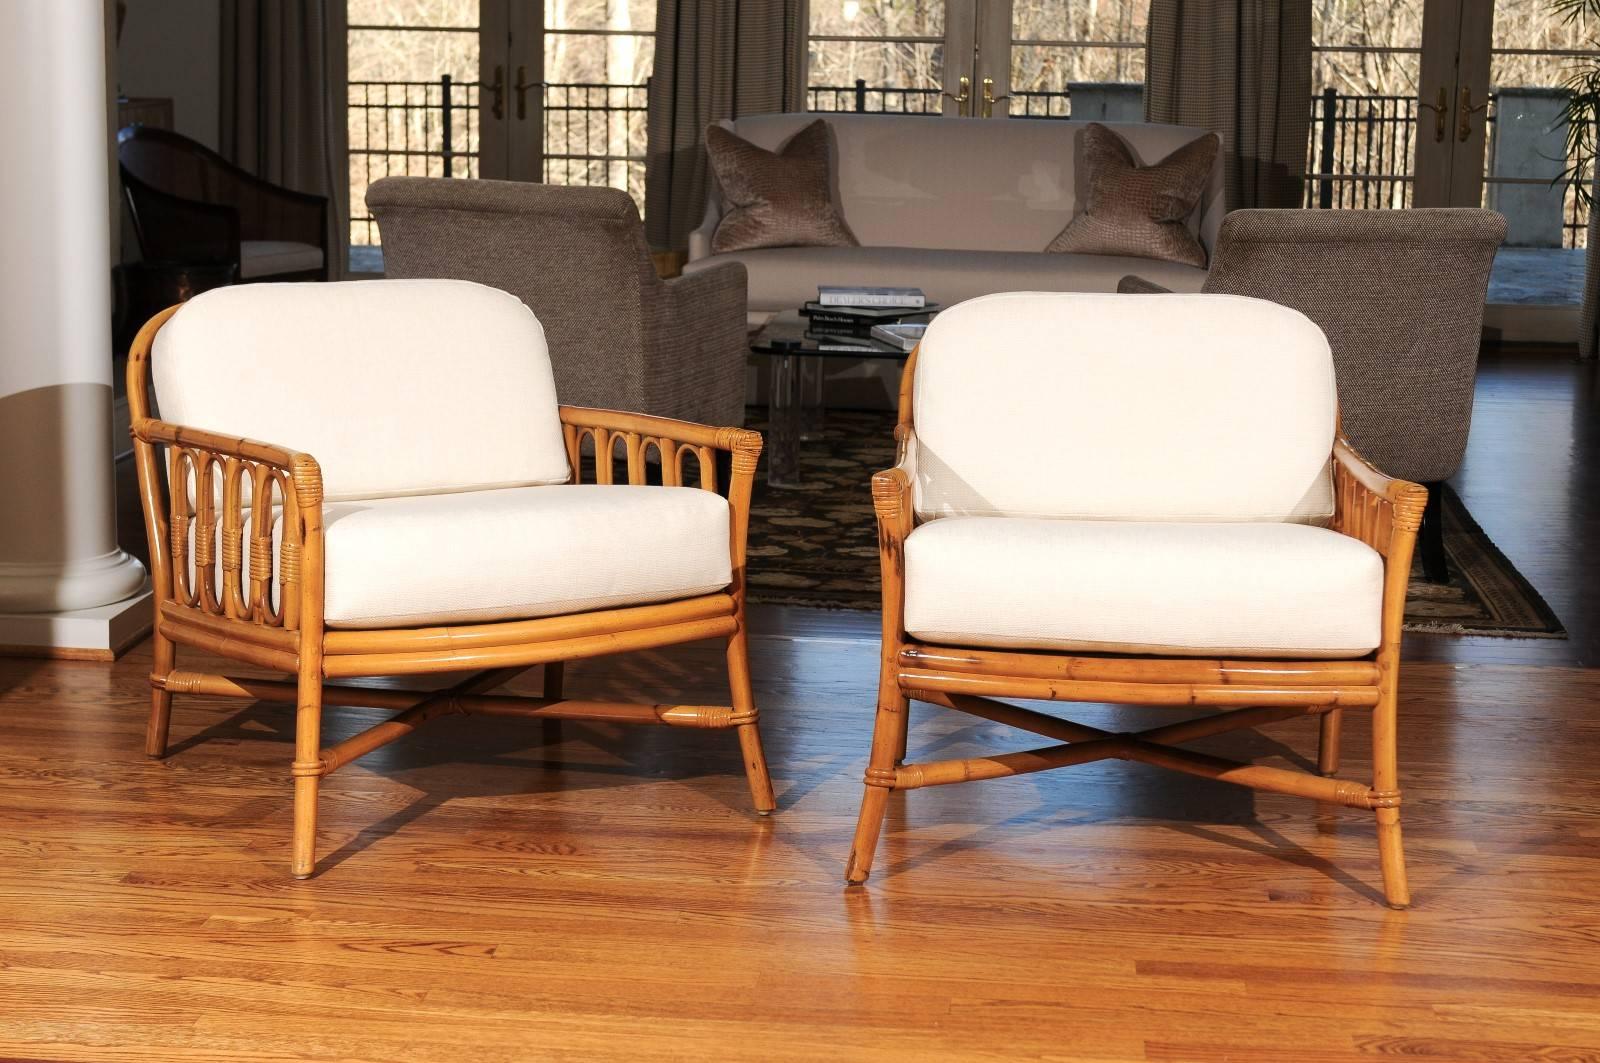 A killer pair of highly decorative rattan lounge chairs by Ficks Reed, circa 1970. Exceptional rattan and hardwood construction. Beautifully proportioned with fabulous detail. Excellent restored condition. The chairs have been professionally cleaned